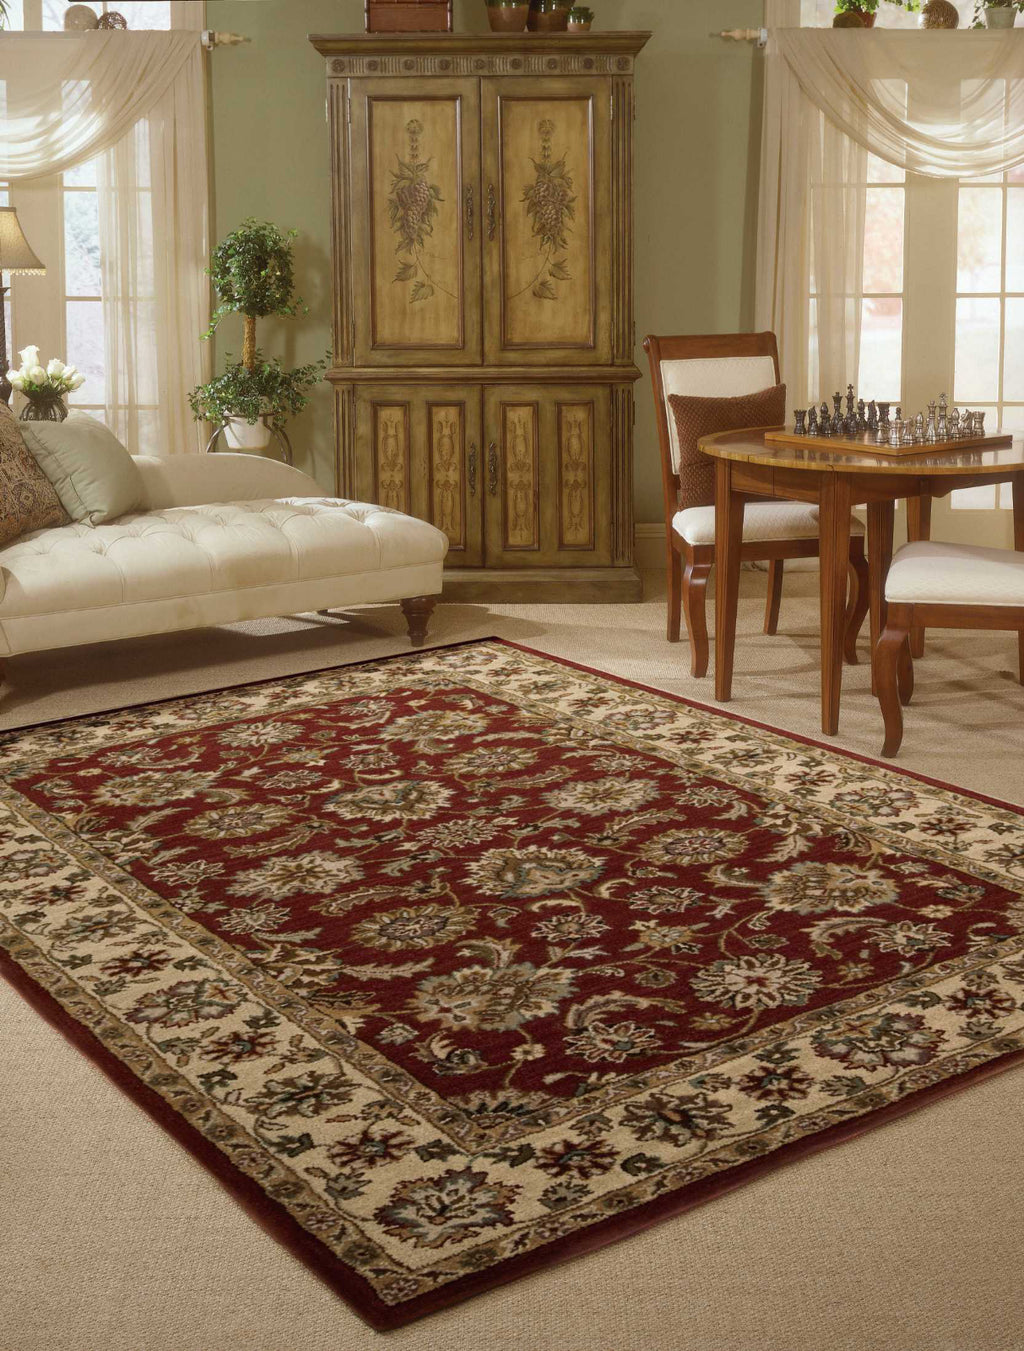 Nourison India House IH72 Red Area Rug Room Image Feature